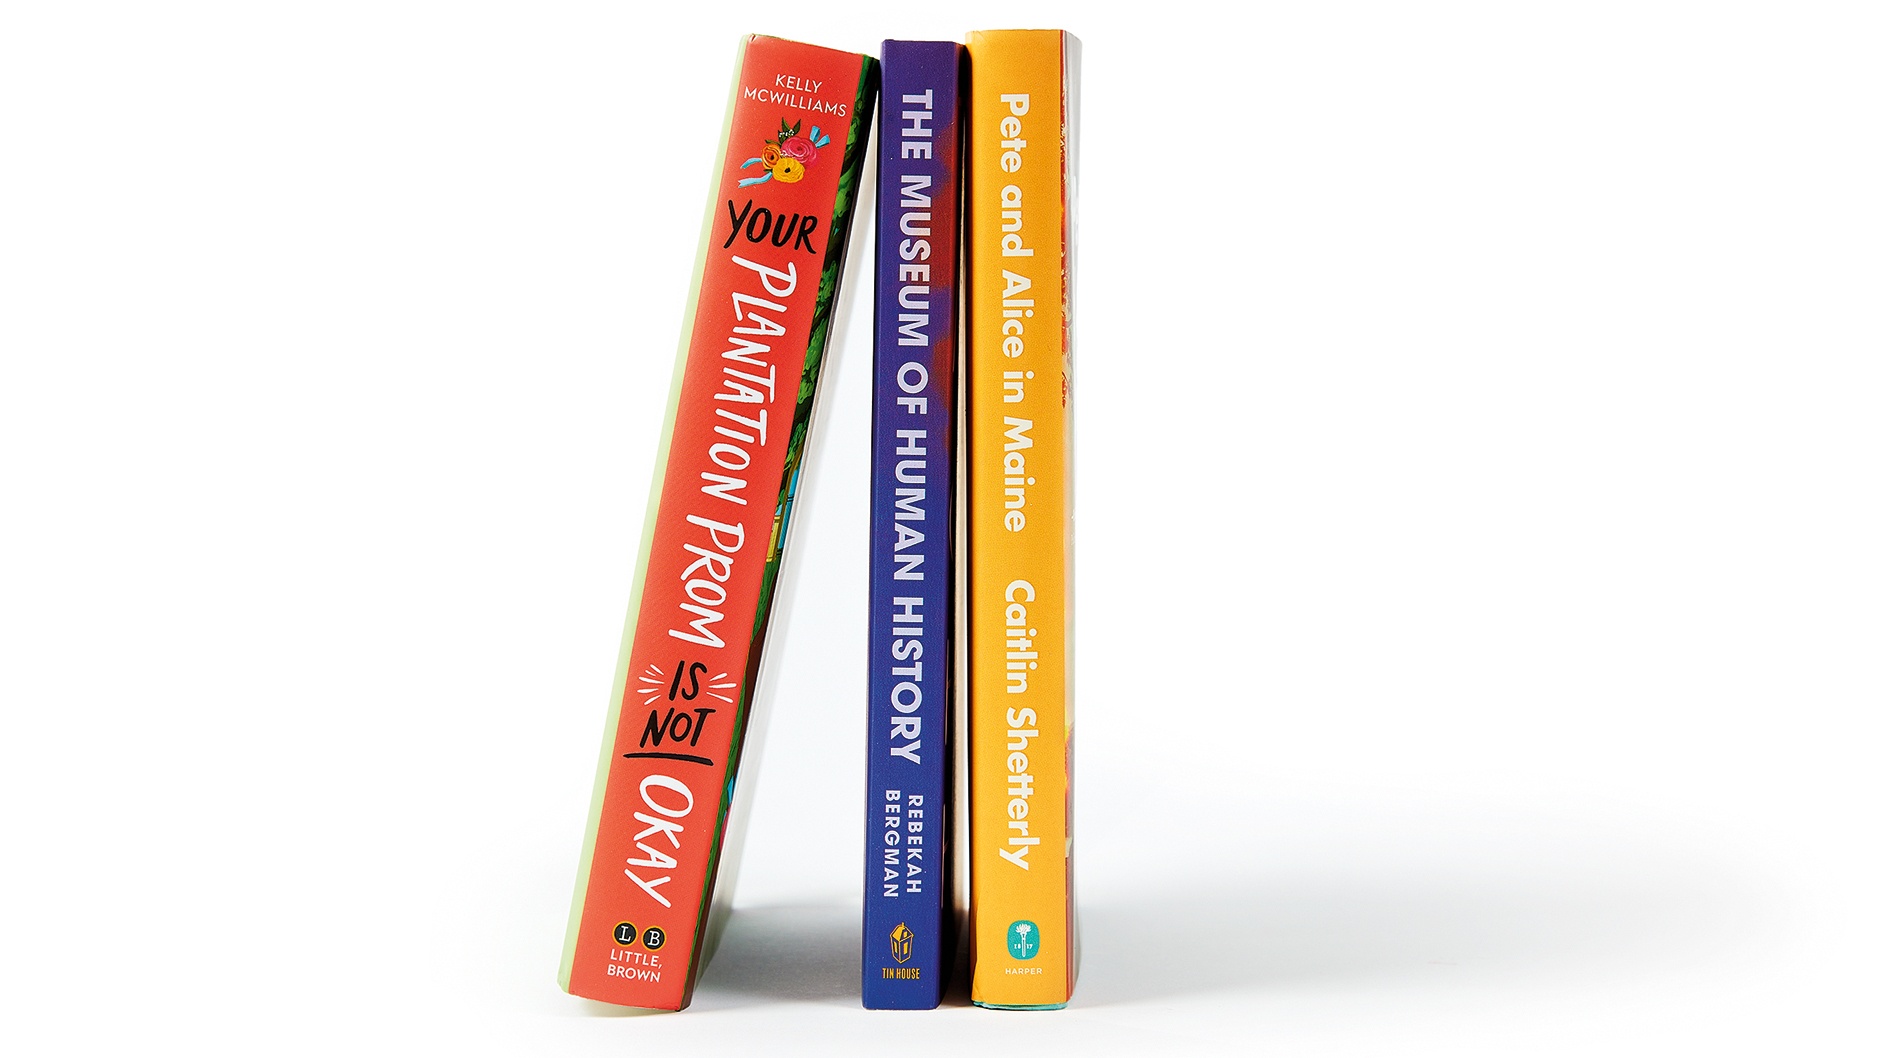 Book spines by Caitlin Shetterly, Rebekah Bergman, and Kelly McWilliams.